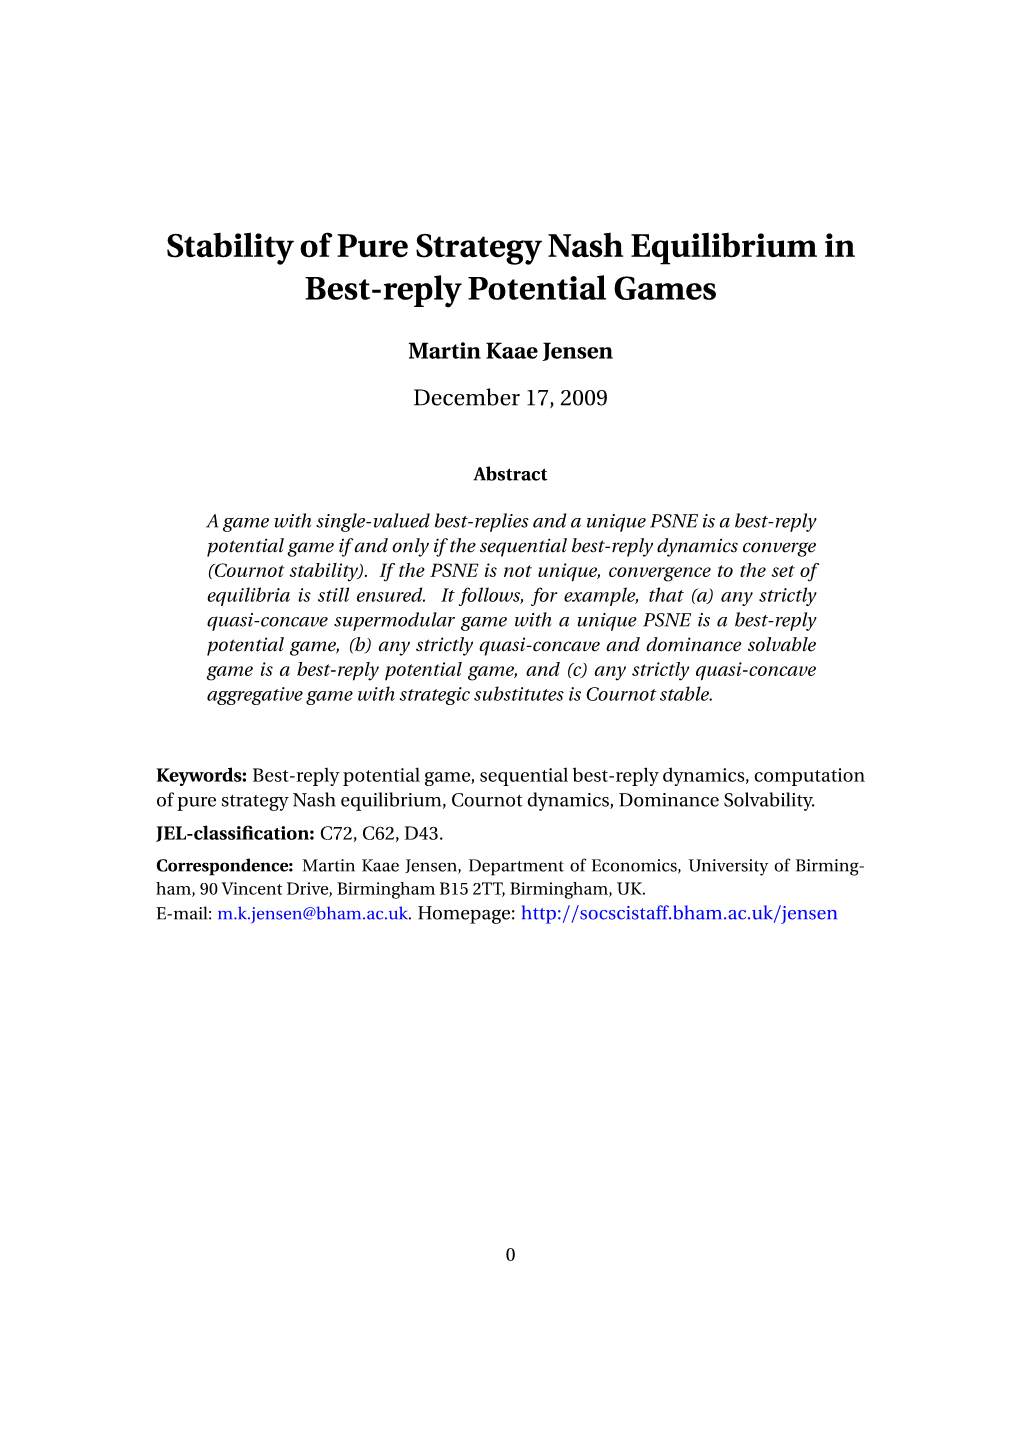 Cournot Stability and Best-Reply Potential Games